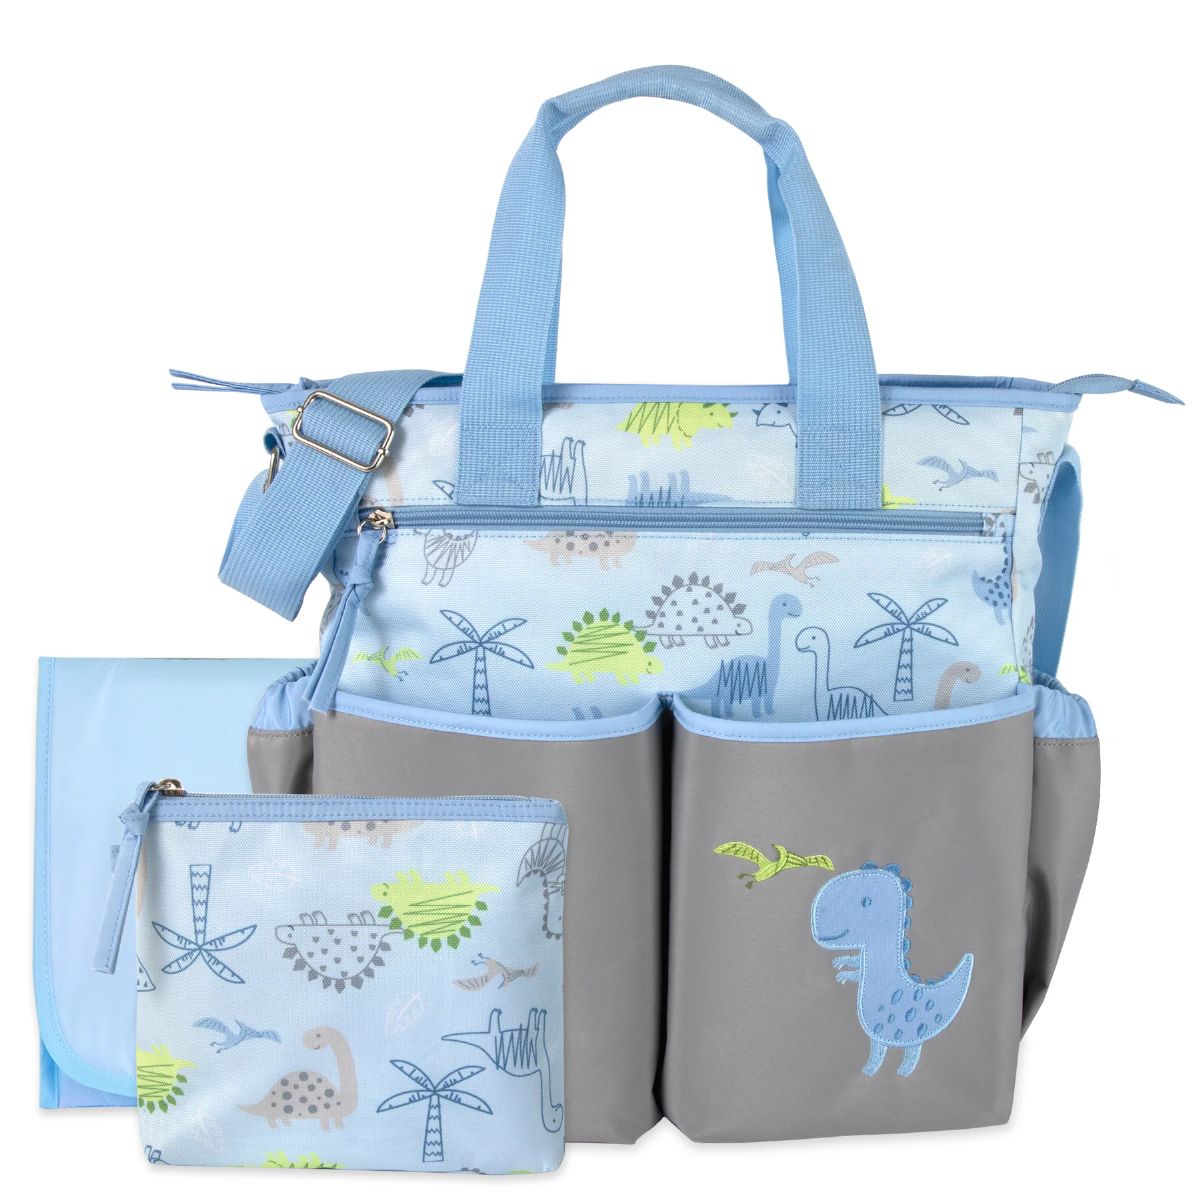 12 Pieces of Baby Essentials 3 In 1 Blue Dino Themed Diaper Bag